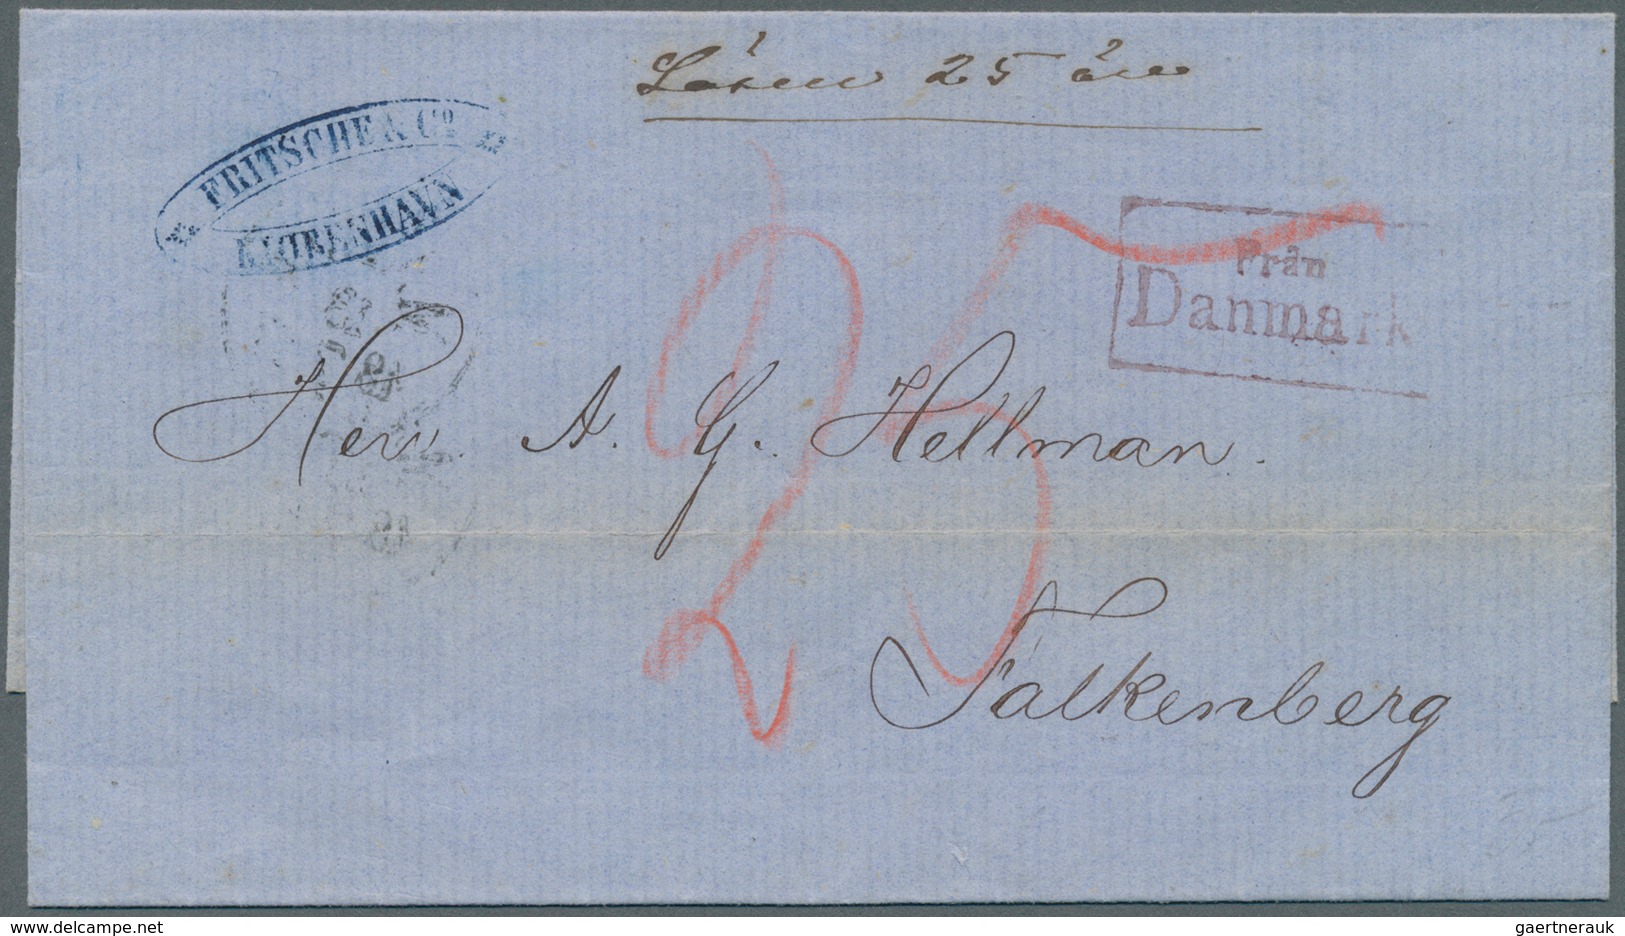 Schweden: 1867, "FRAN DANMARK", Boxed VIOLET Ship Mail Arrival Marking On Entire Letter From Copenha - Unused Stamps